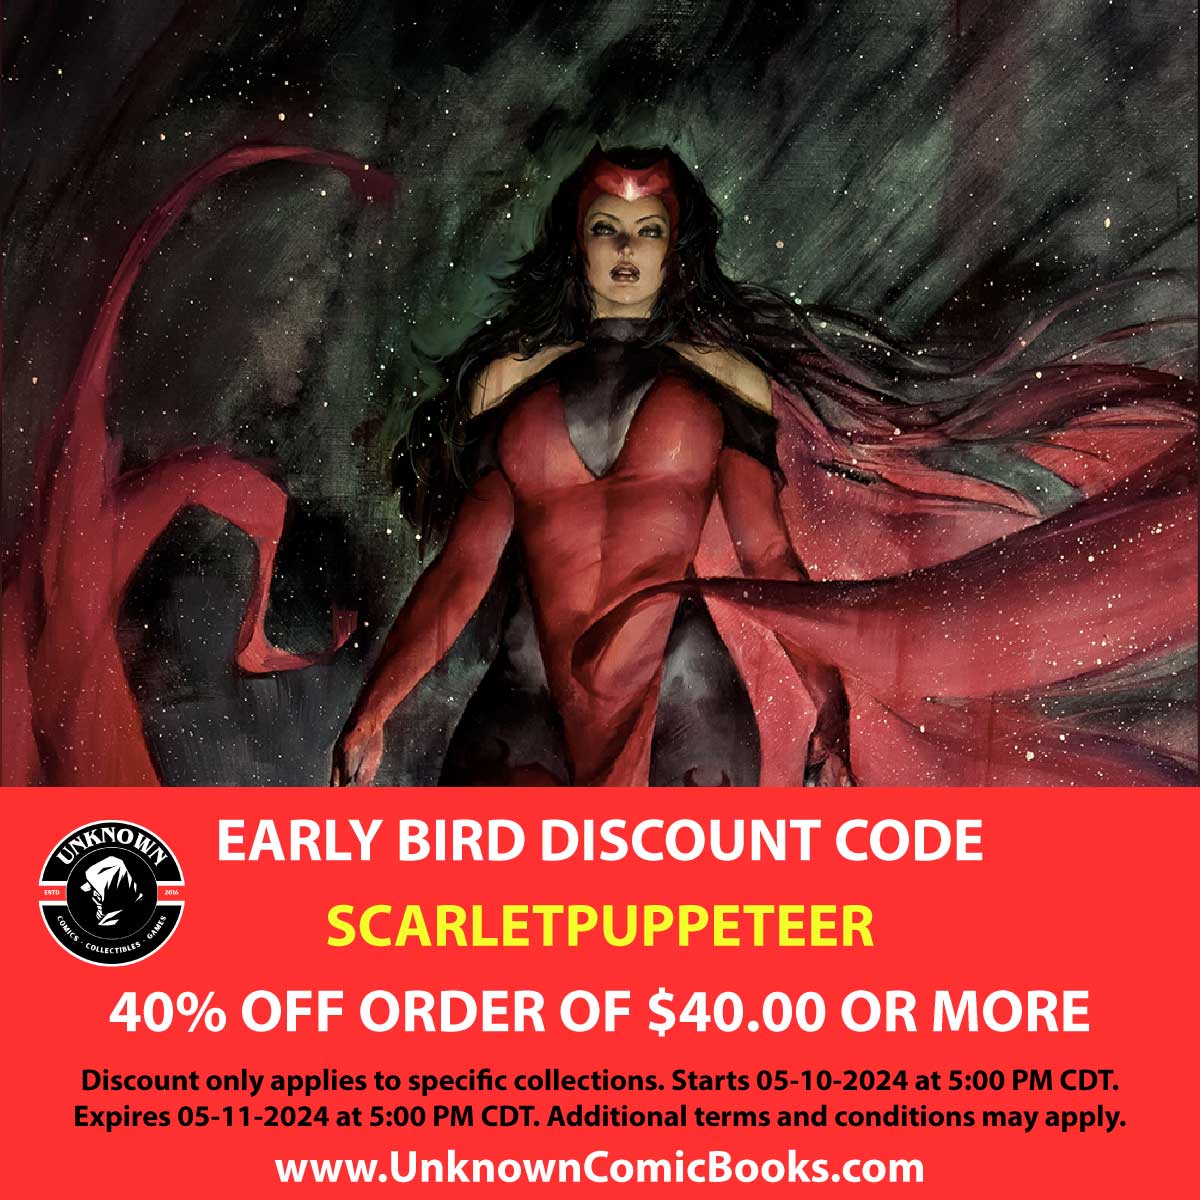 Pre-order NOW: Scarlet Witch #1 Puppeteer Lee Exclusive!  This historic Marvel cover debuts for a limited time.  Use code SCARLETPUPPETEER for 40% off orders of $40+ (24hrs only)!UnknownComicBooks.com #ScarletWitch #PuppeteerLee #ExclusiveVariant #UnknownComics #DiscountCode